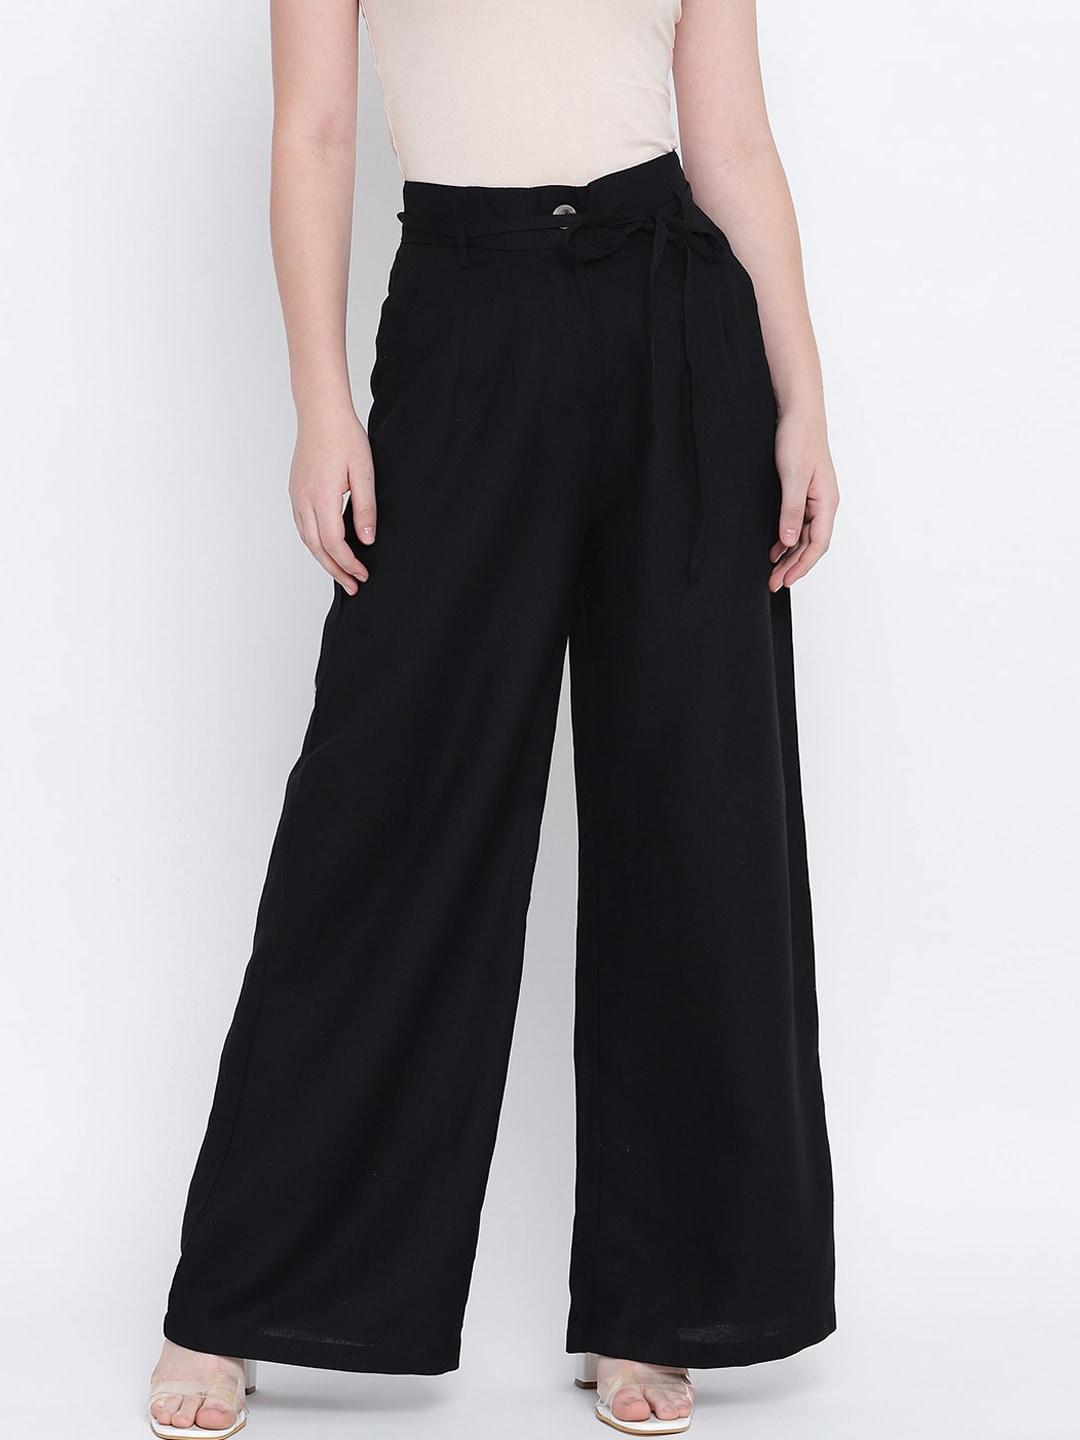 Oxolloxo Women Black High-Rise Parallel Trousers